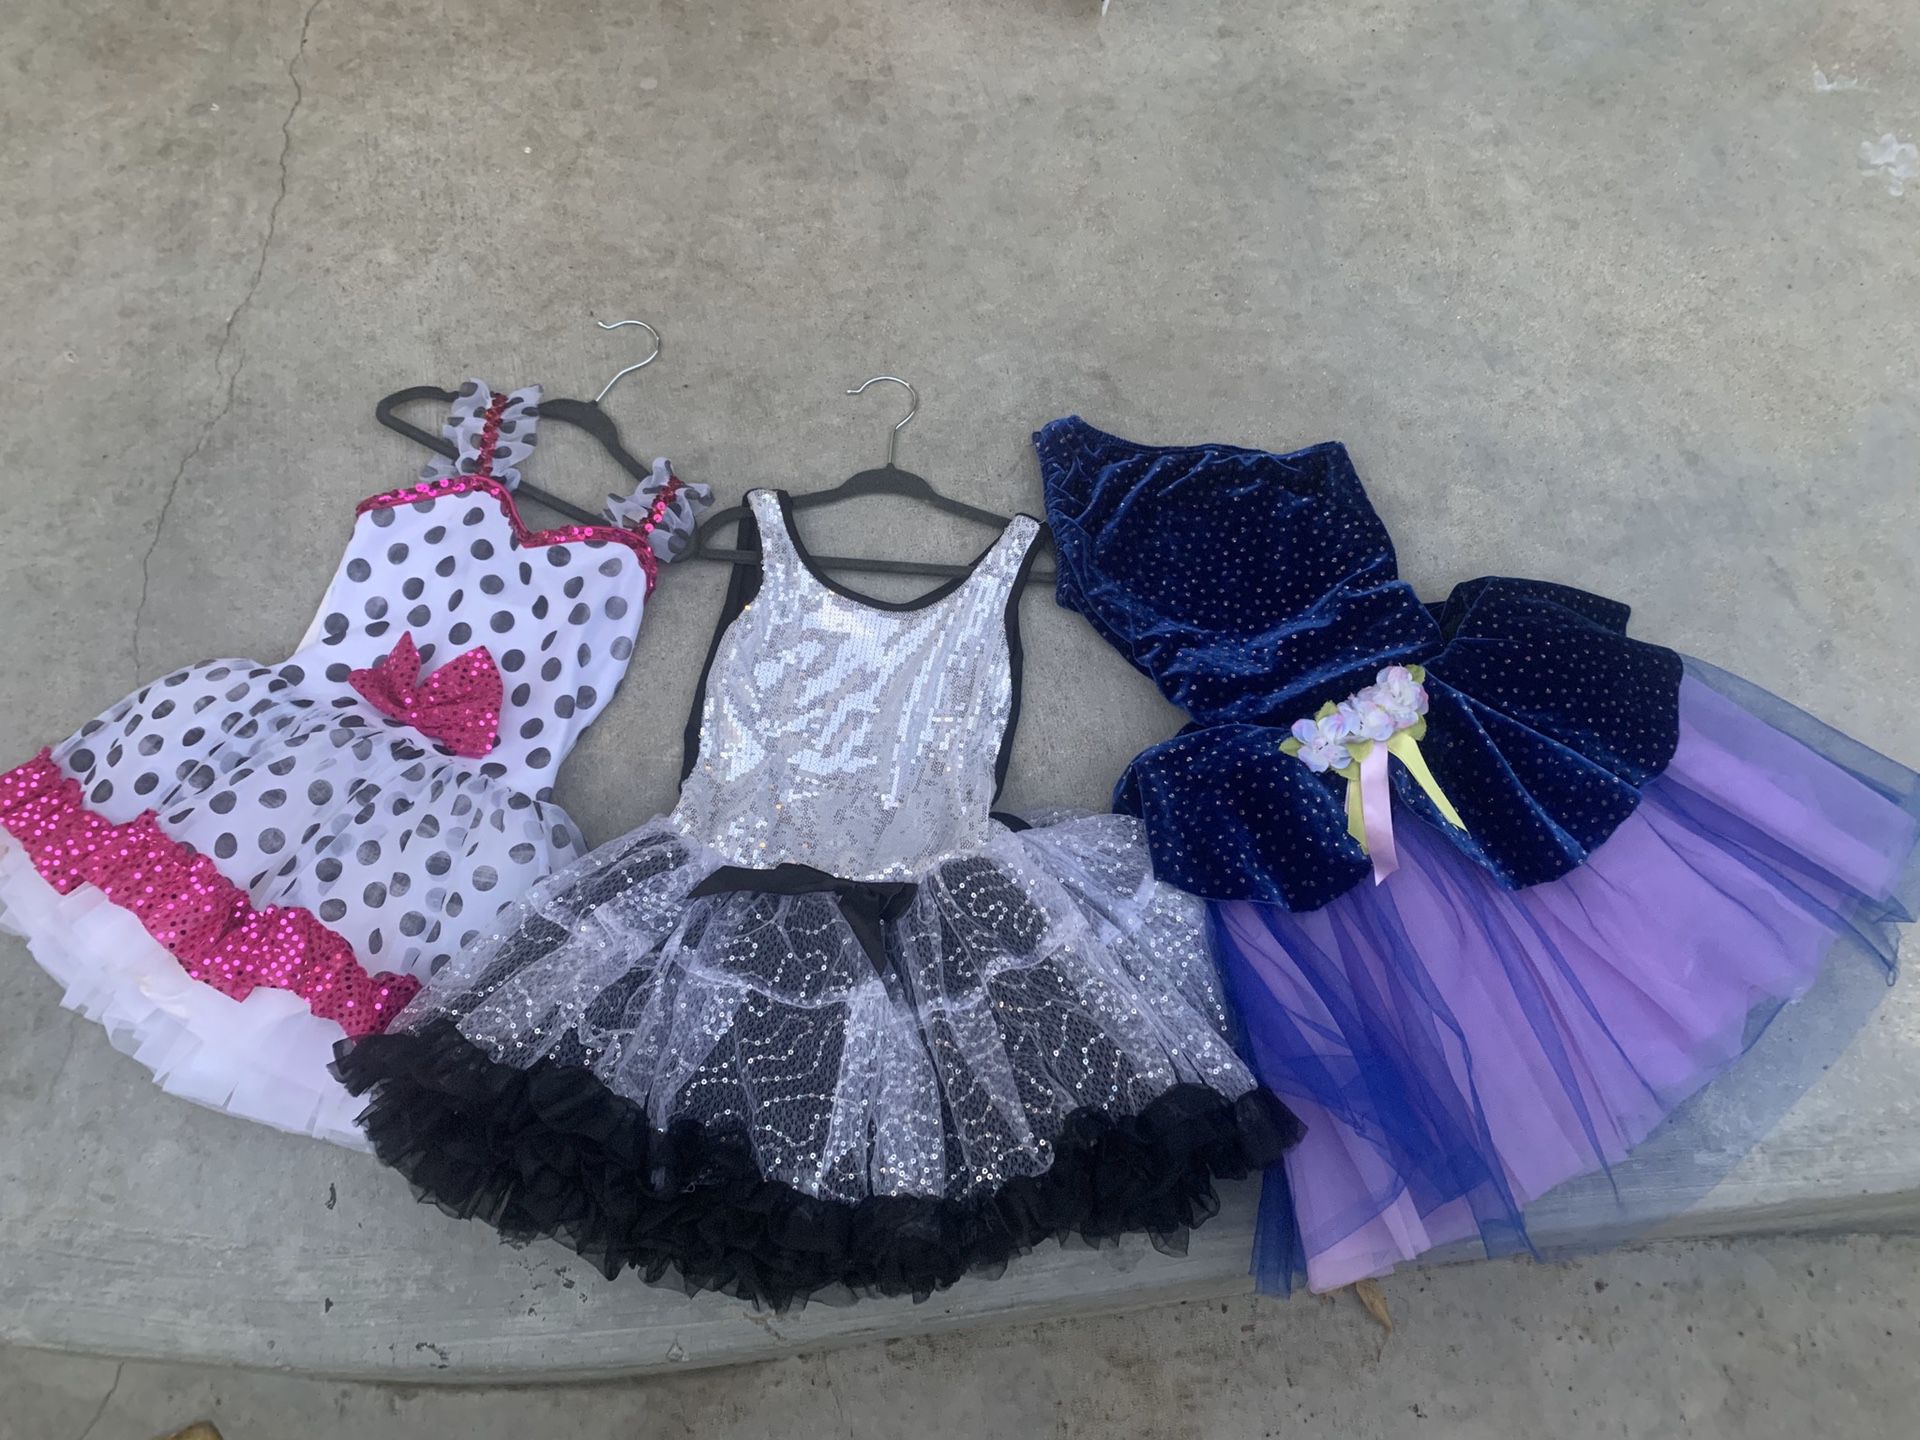 Toddler Dresses, Pretend Play, Princess costumes, ages 3 through 6